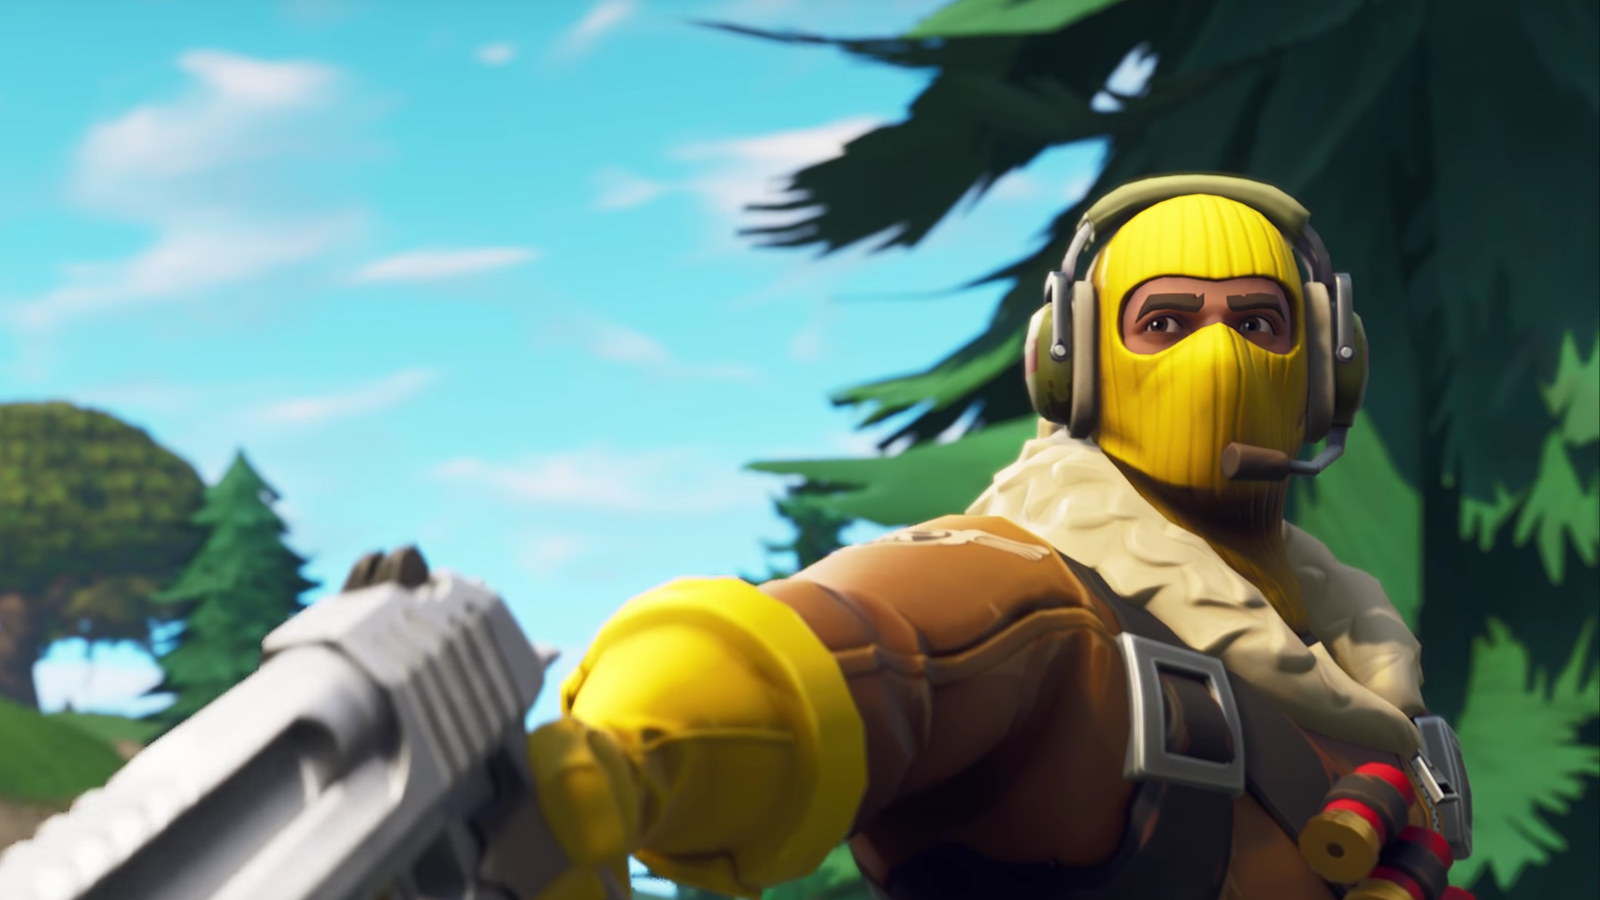 Fortnite Players Are Getting Fraudulent Charges For ... - 1600 x 900 png 1542kB